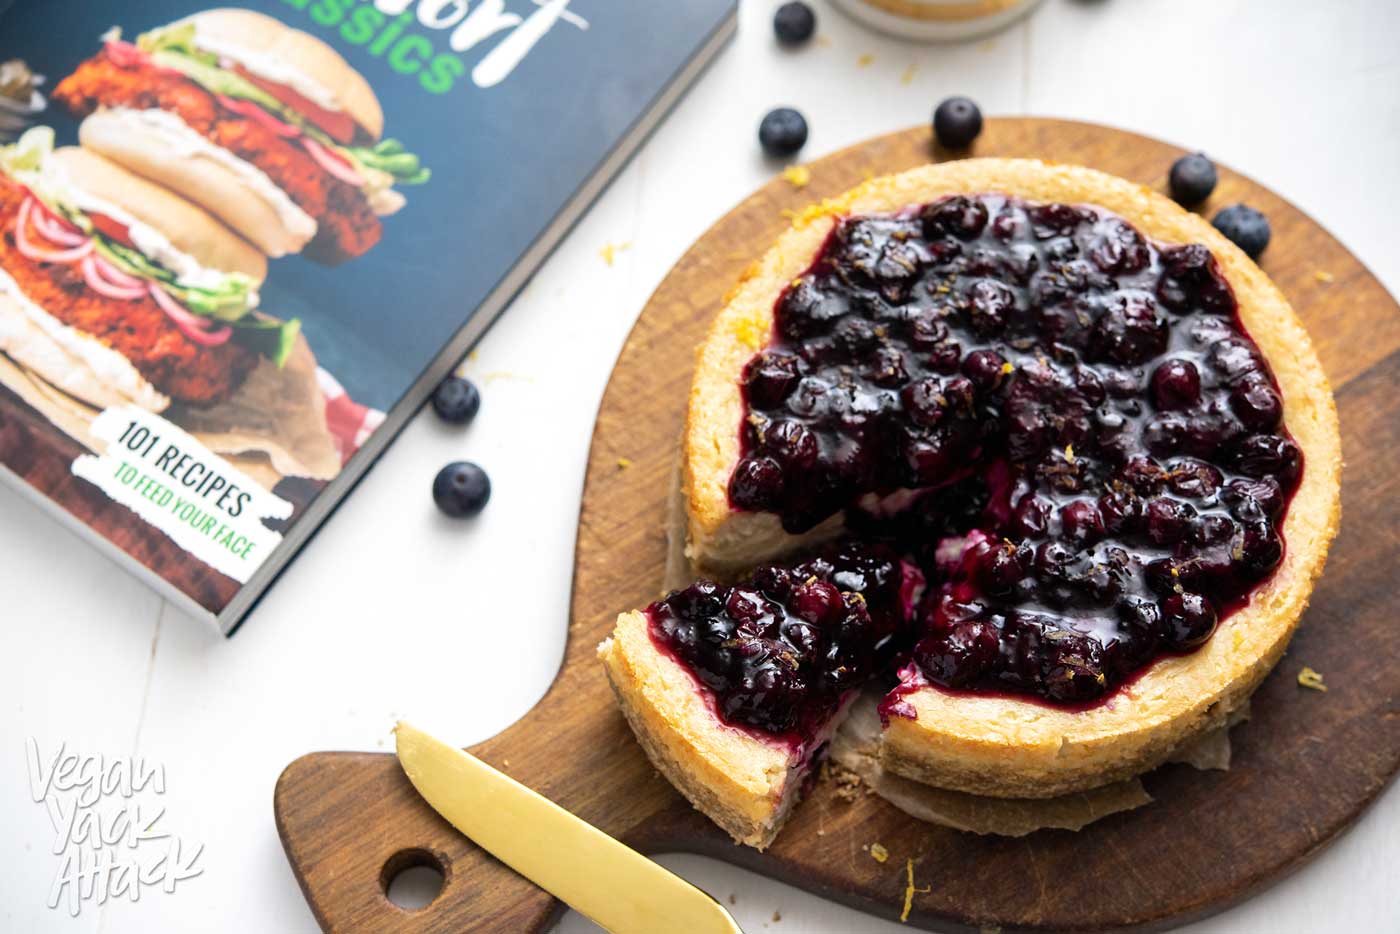 This vegan, Baked Blueberry Cheesecake is luscious and SO much like the traditional version! Plus, it's gluten-free! Indulge in this delectable dessert from Lauren Toyota's cookbook, Vegan Comfort Classics, and you won't be disappointed.